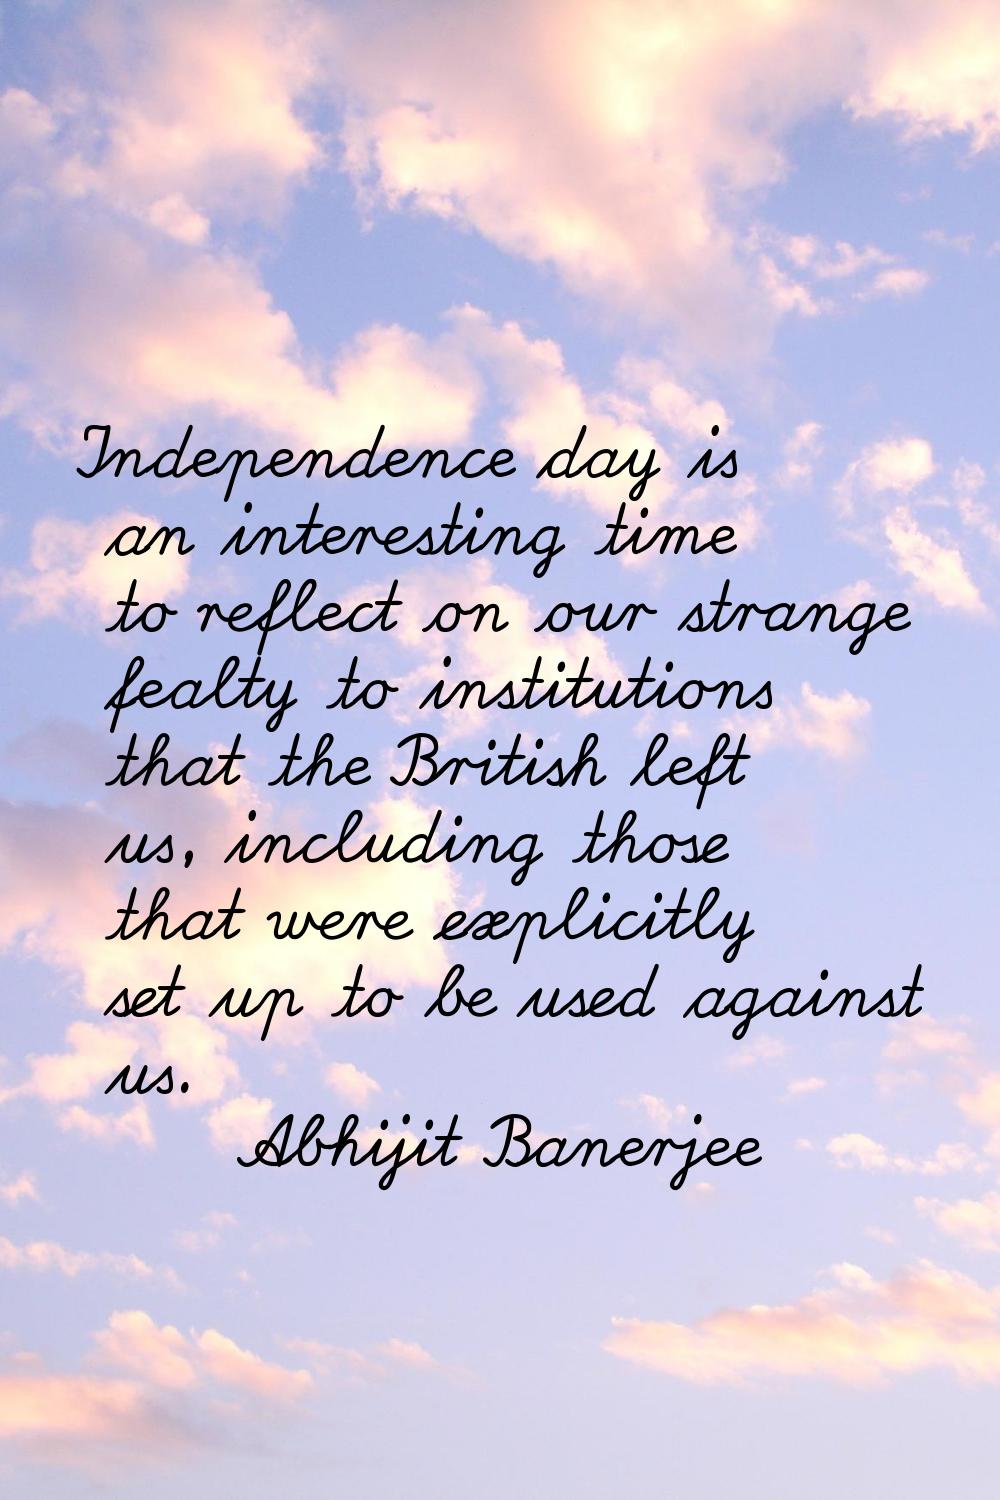 Independence day is an interesting time to reflect on our strange fealty to institutions that the B